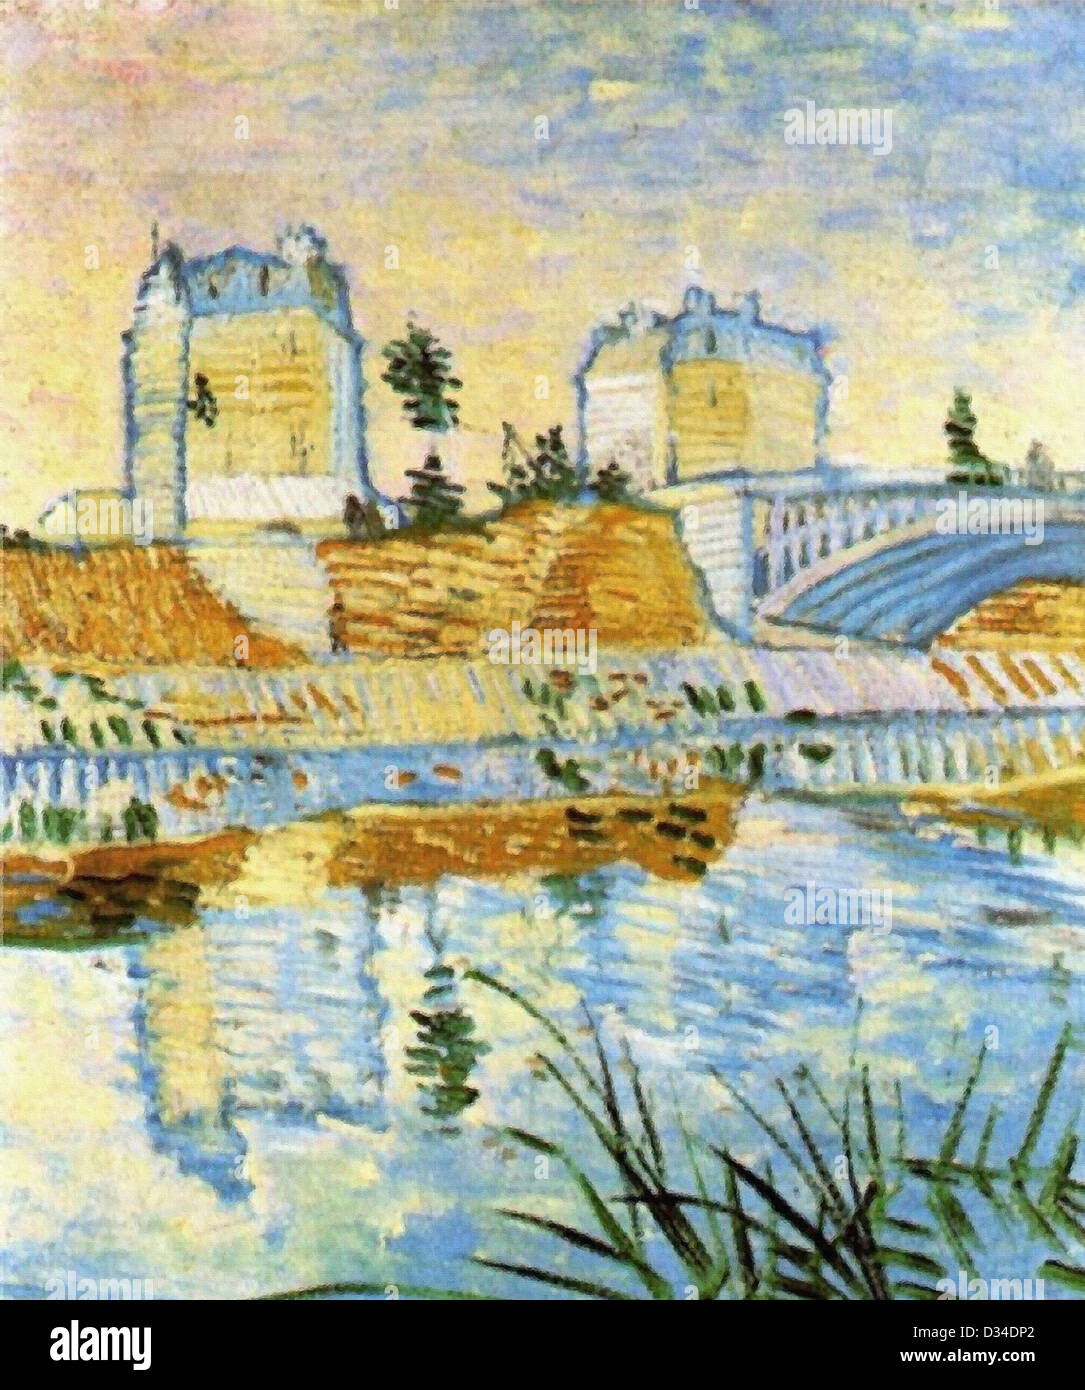 Vincent van Gogh: The Seine with the Pont de Clichy. 1887. Oil on canvas. Wallraf-Richartz Museum, Cologne, Germany. Stock Photo